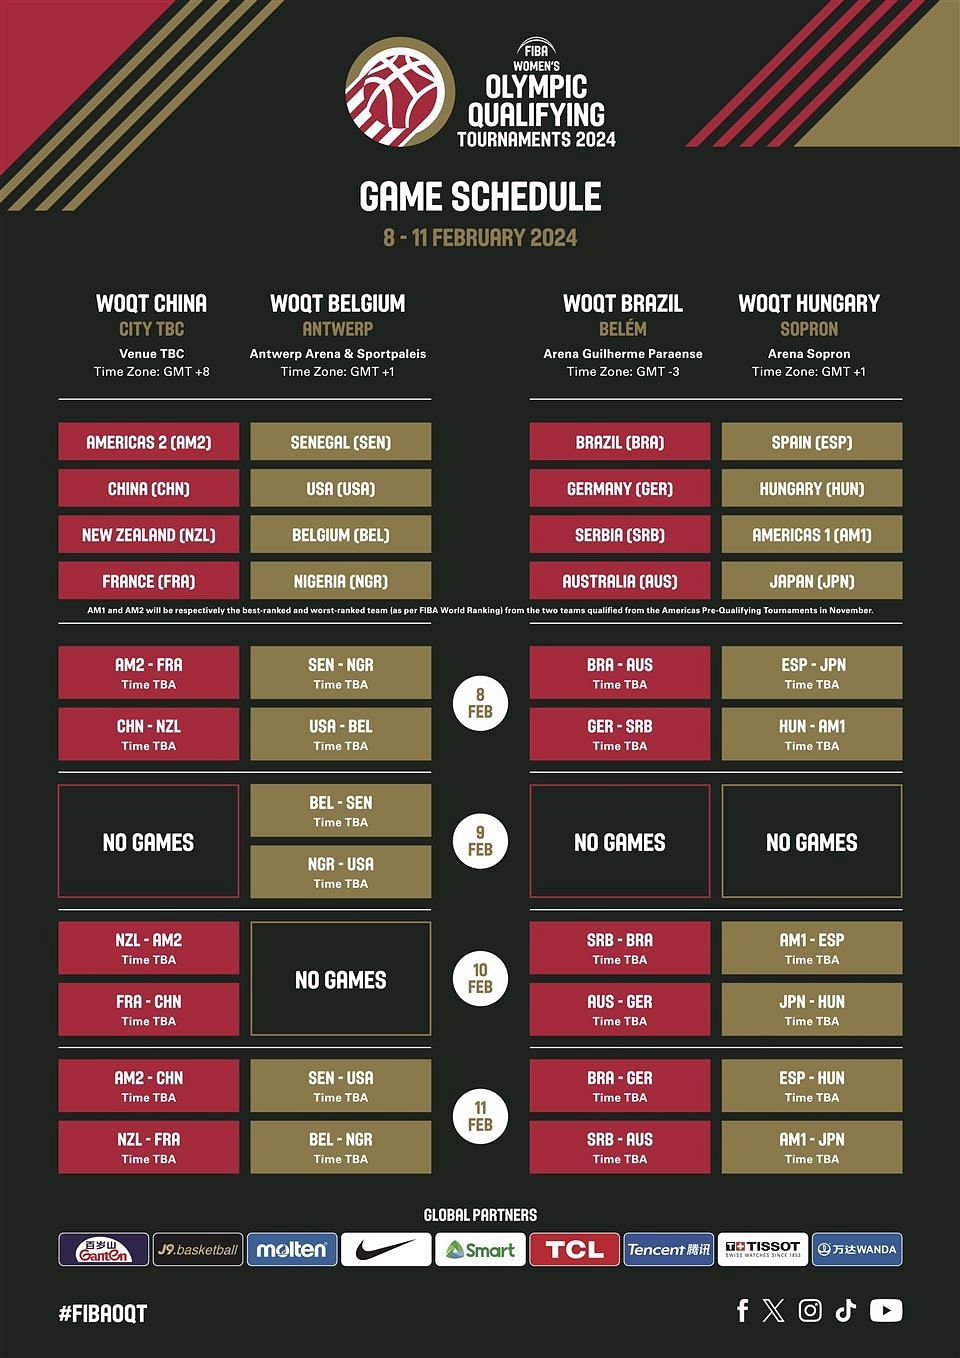 The detailed schedule. (PC: FIBA)